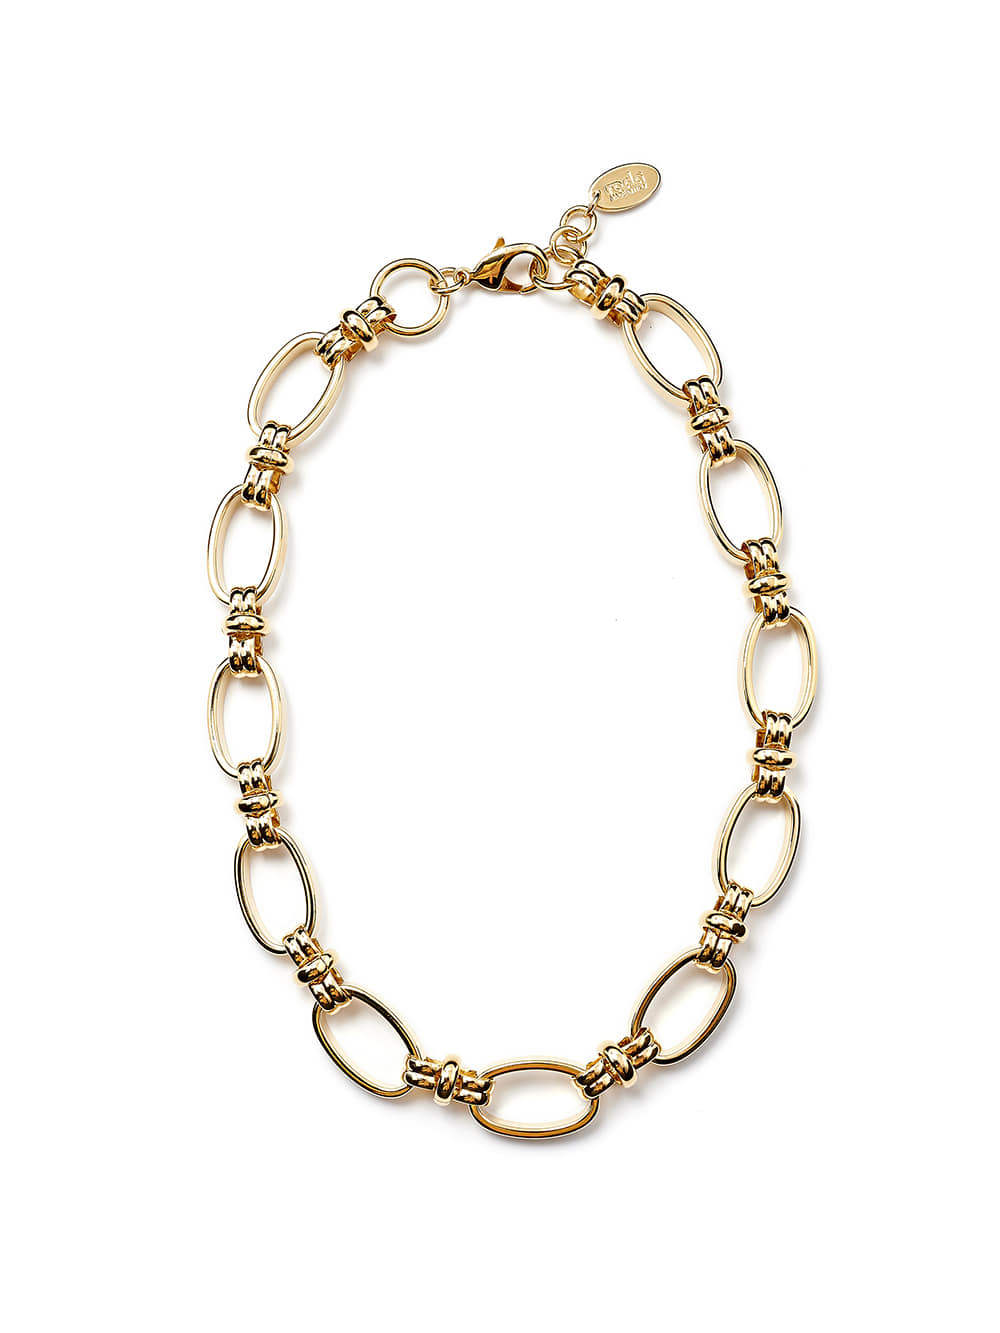 HIGH-END CHAIN NECKLACE II